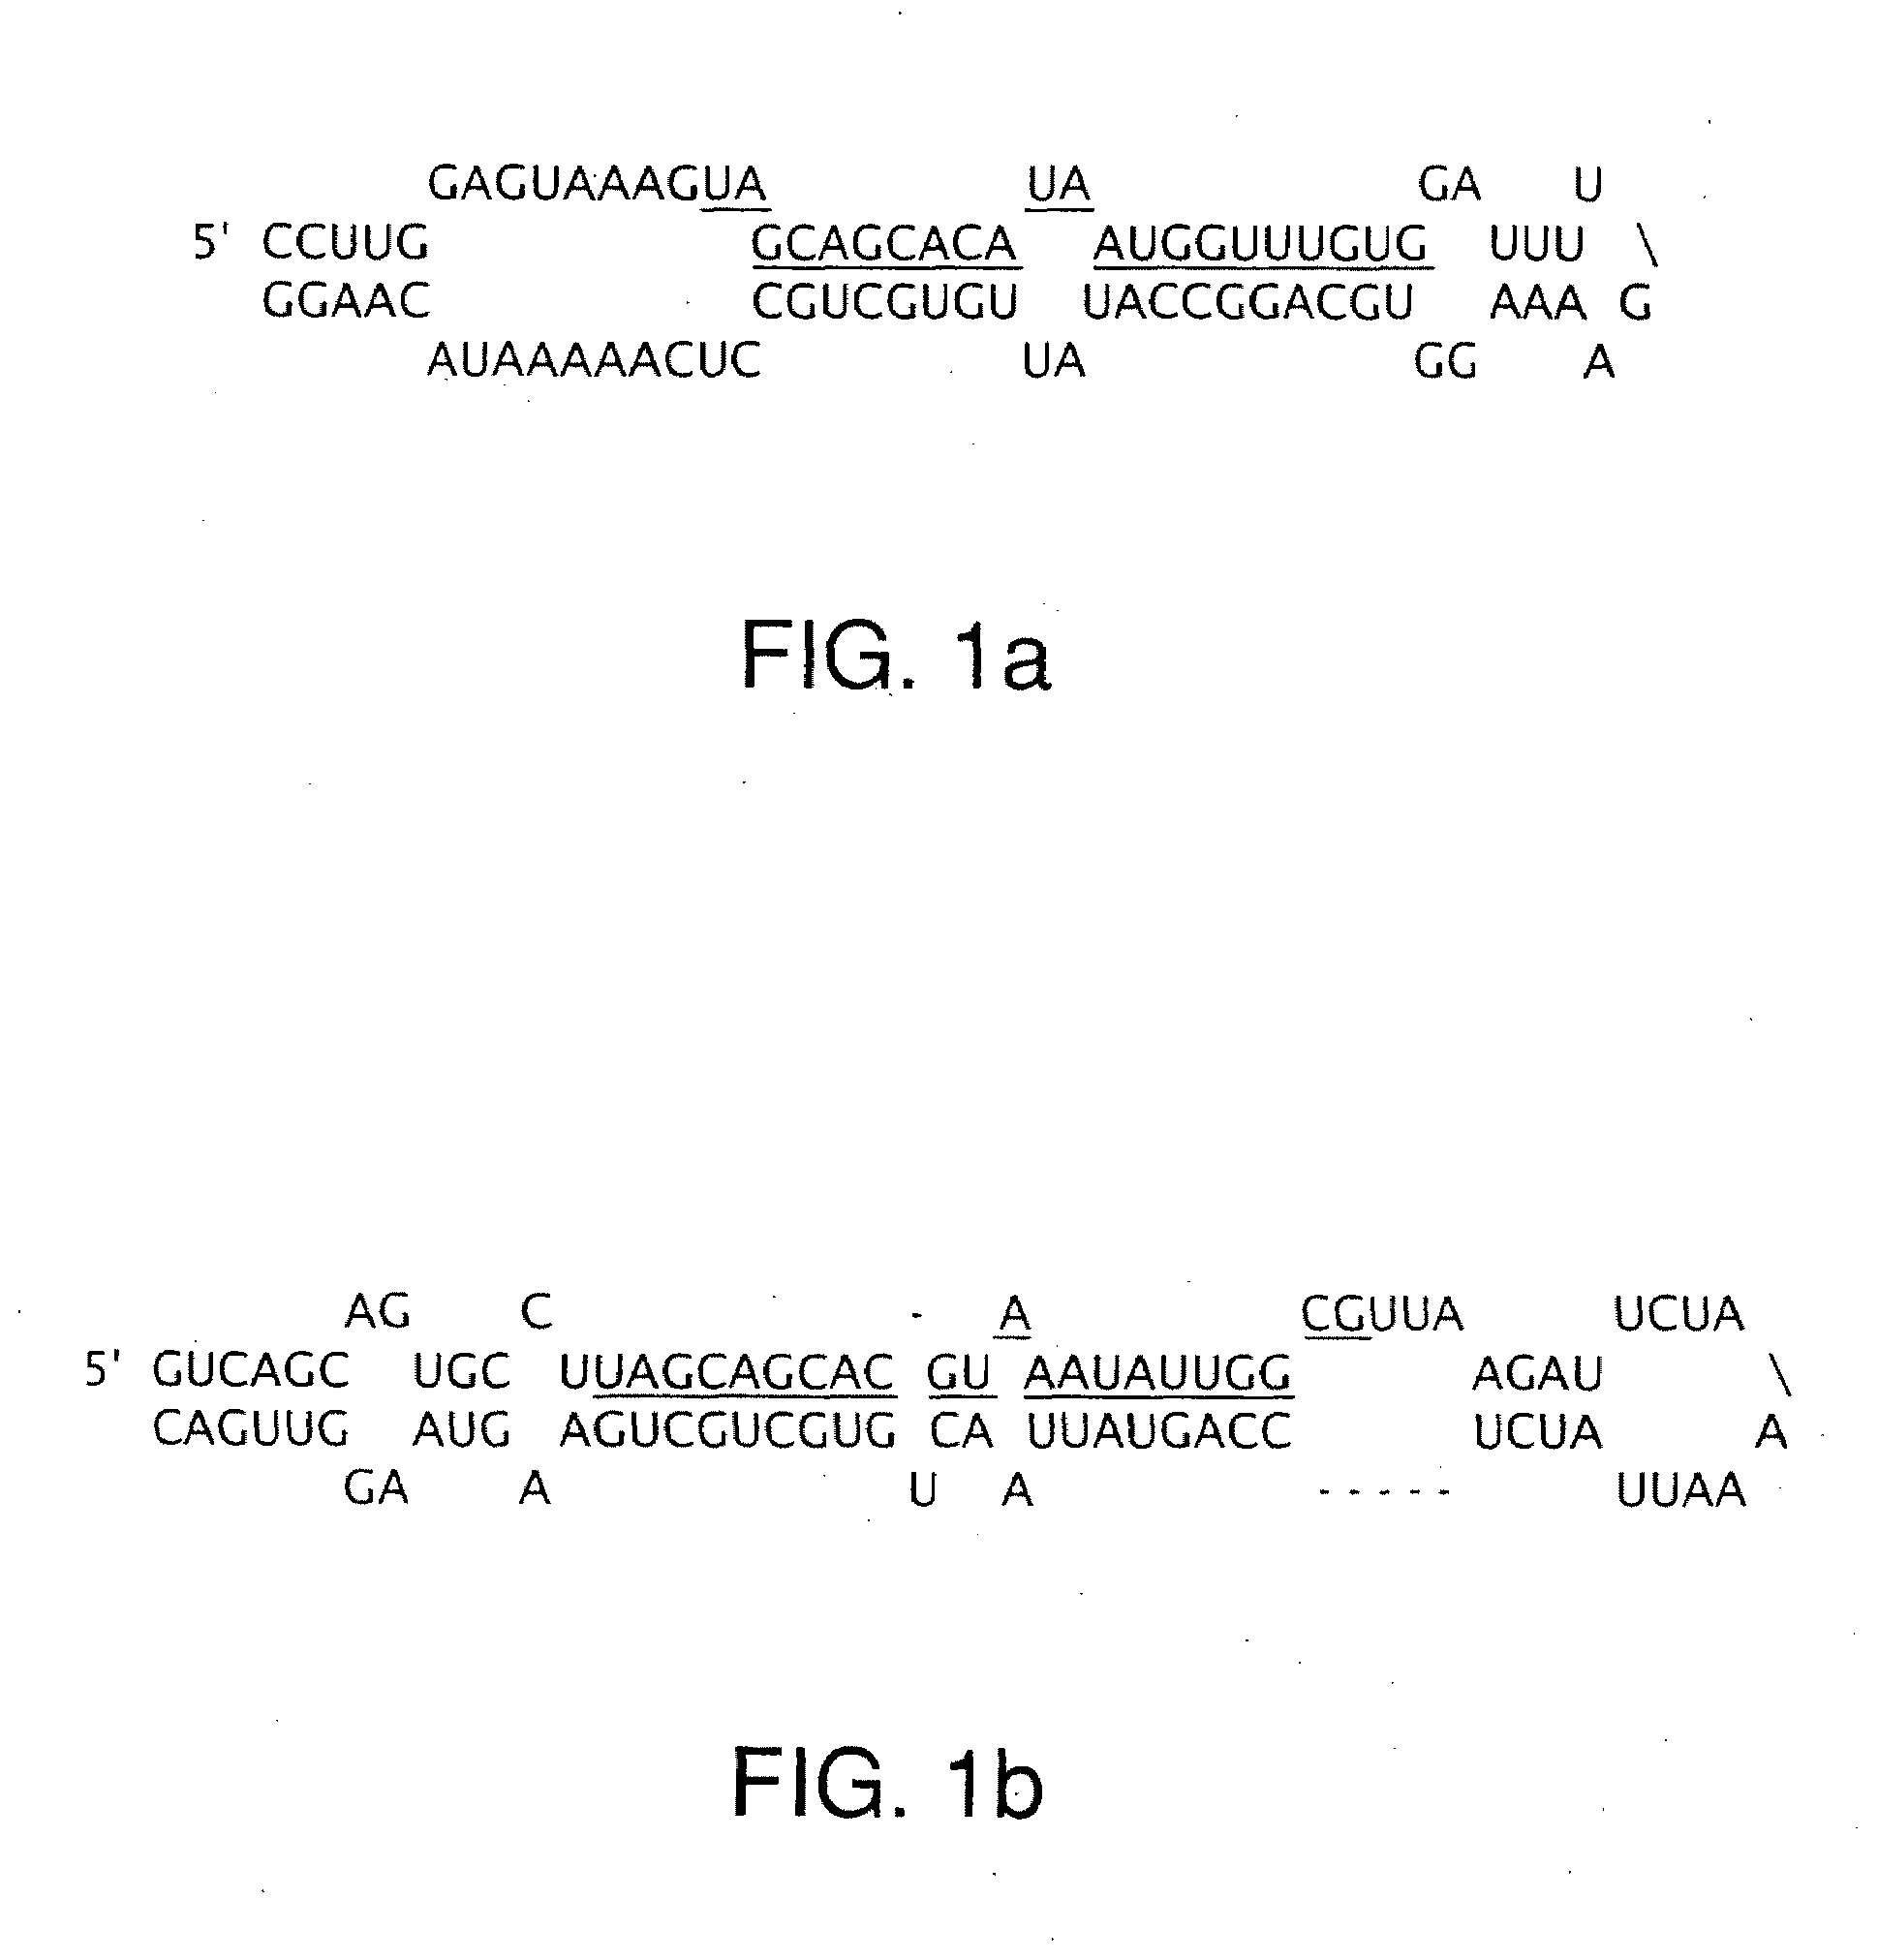 Compositions and methods for cancer diagnosis and therapy